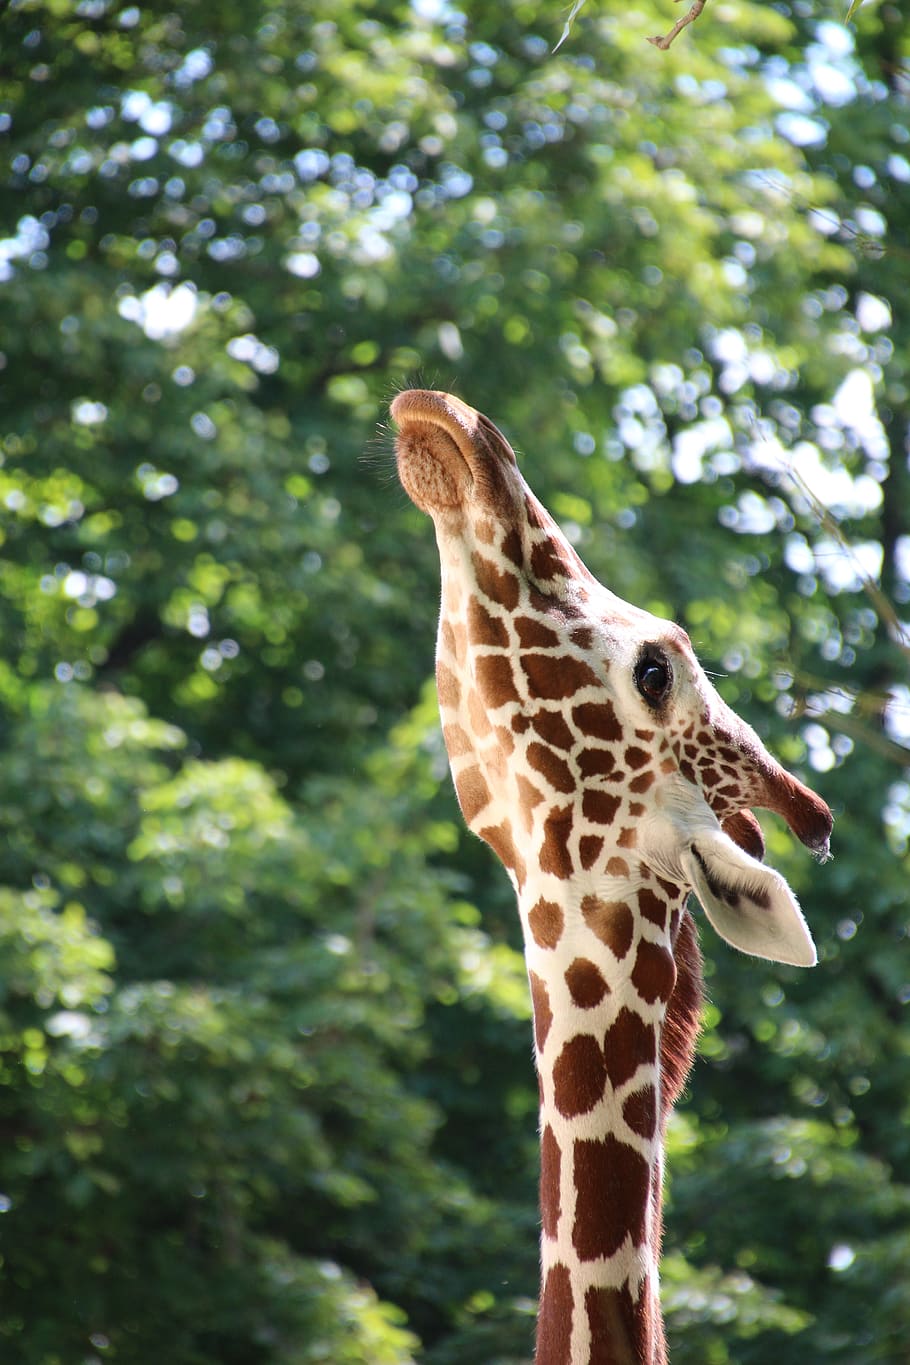 giraffe, face, close up, zoo, background green, stretches neck, HD wallpaper